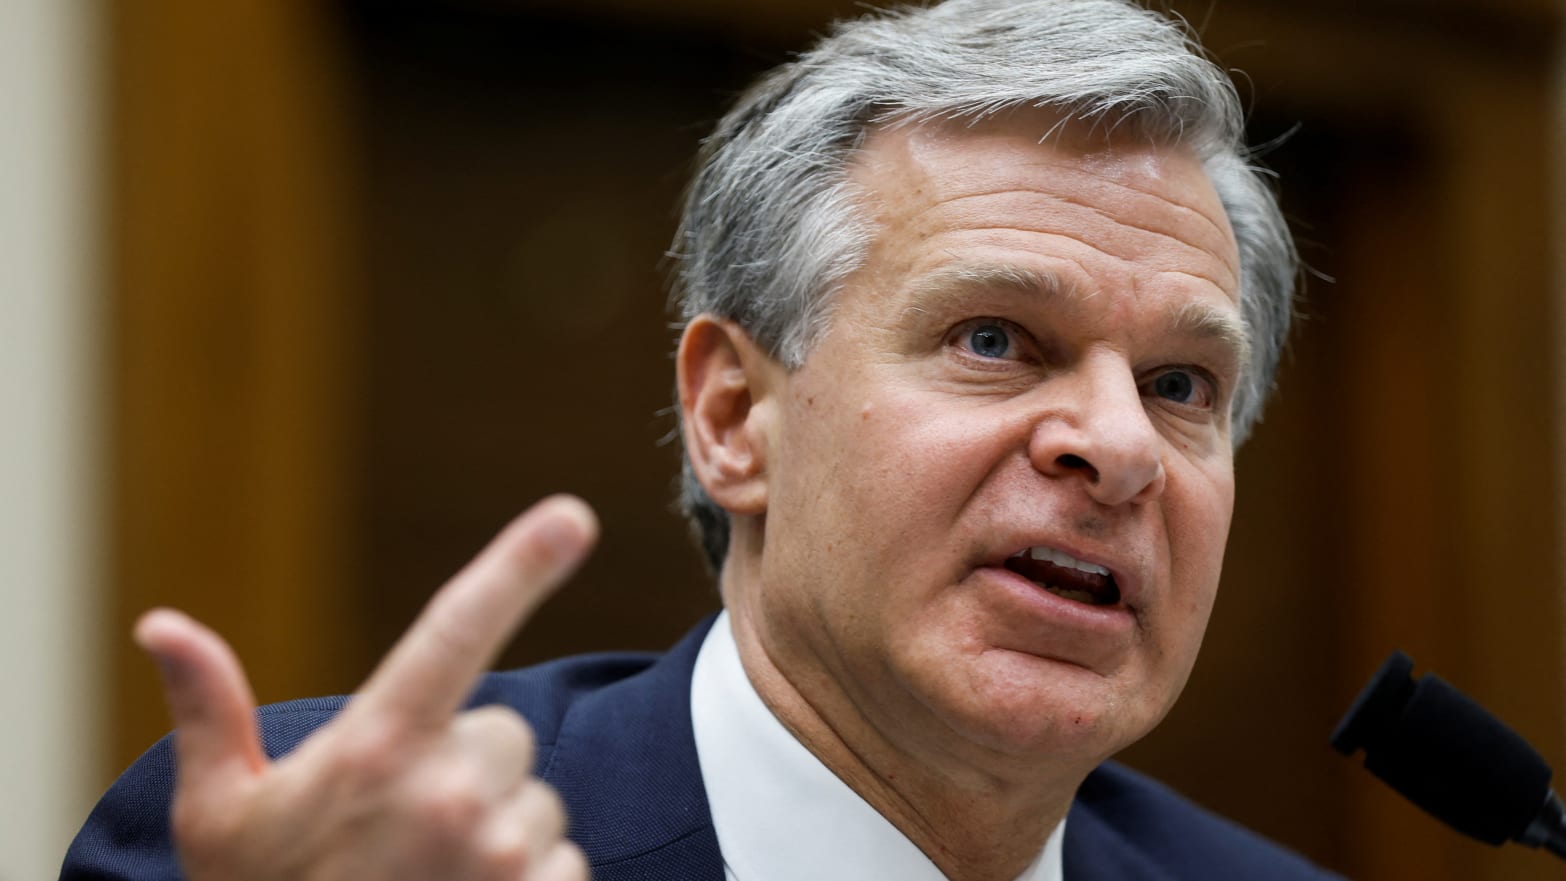 FBI Director Christopher Wray fielded questions from Republicans about Jan. 6 and the Covid-19 lab-leak theory.